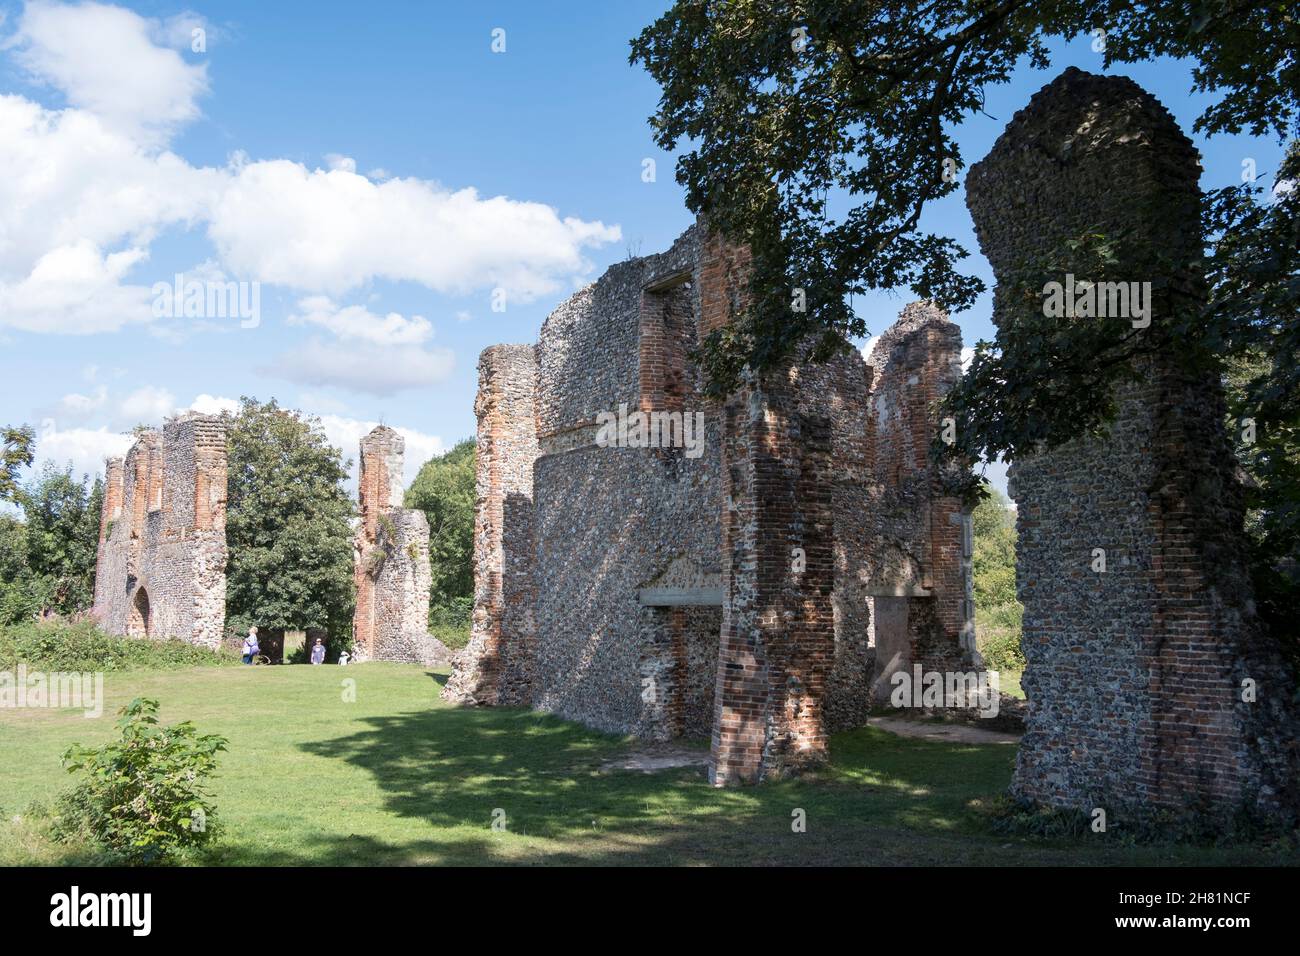 Lee House ruins, Sopwell Nunnery, St Albans. Stock Photo